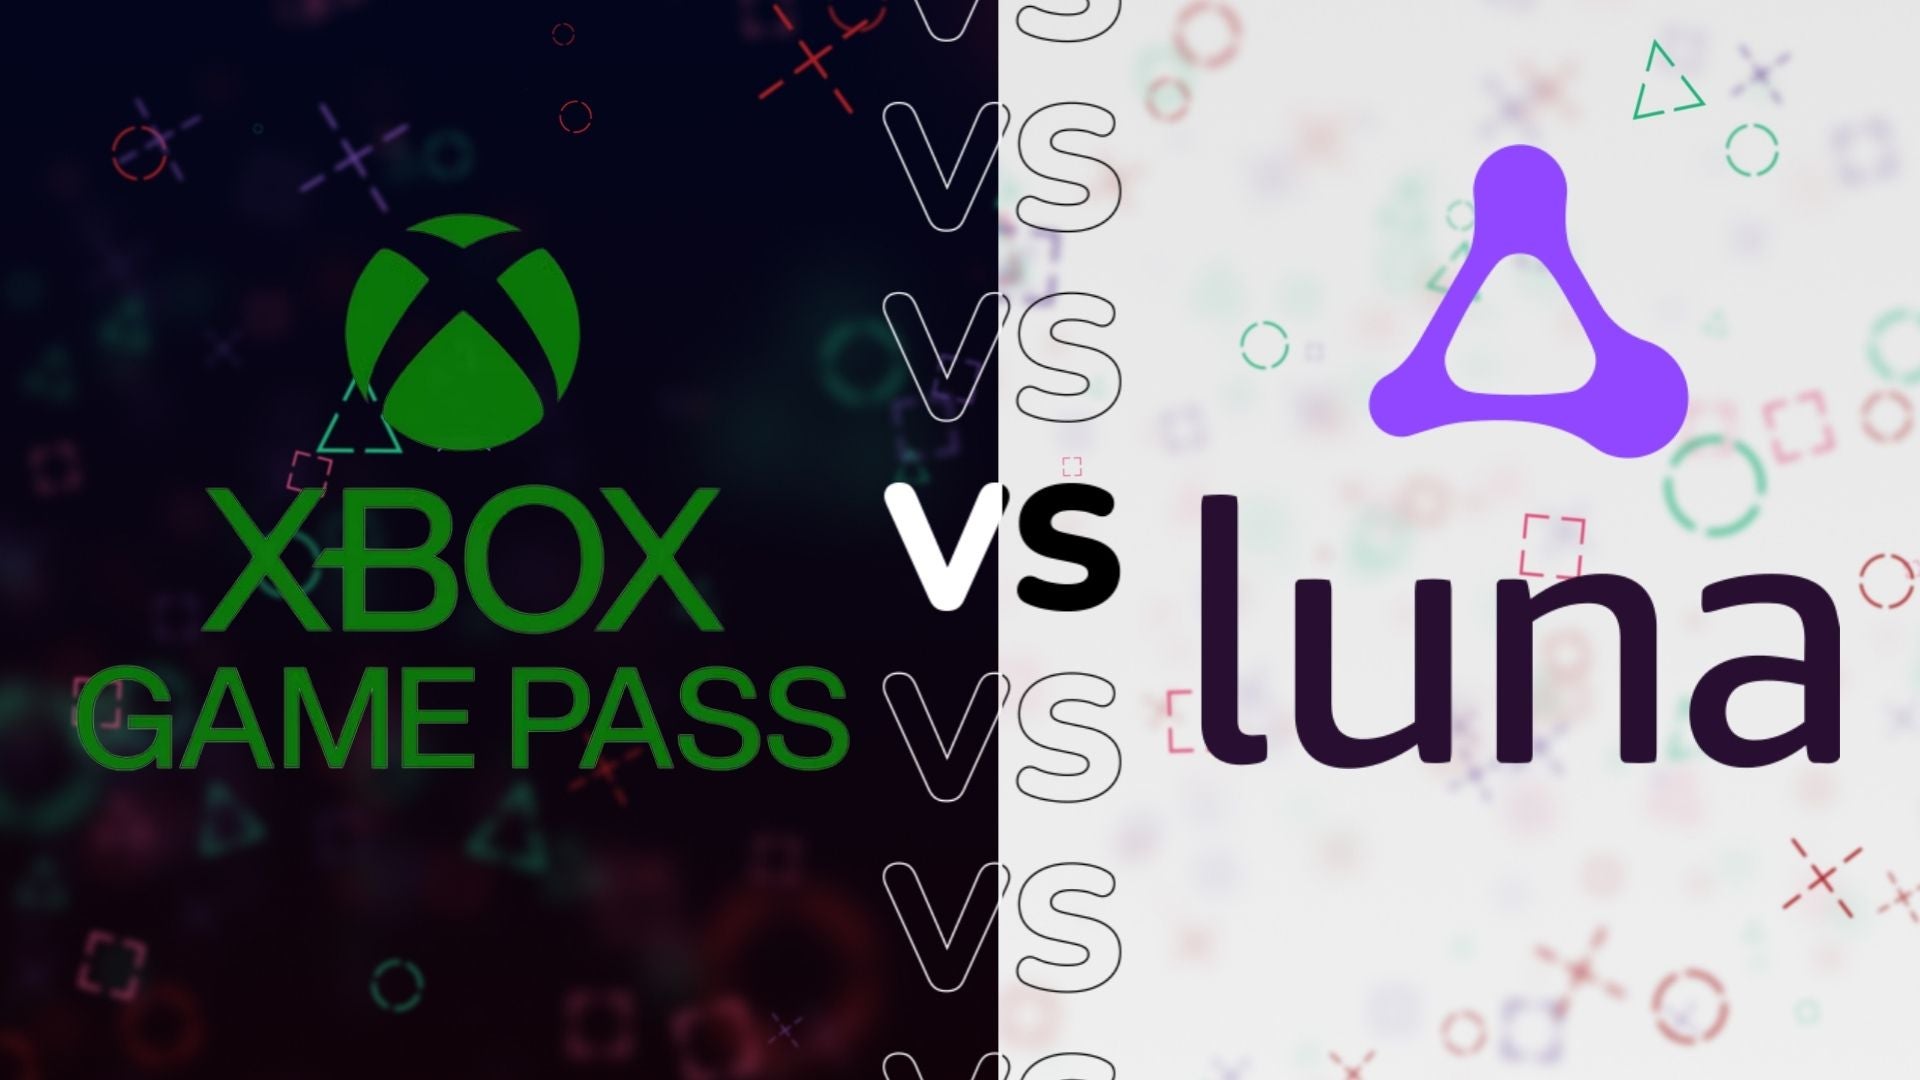 Xbox Game Pass Vs. PlayStation Now: Which Subscription Service Wins?